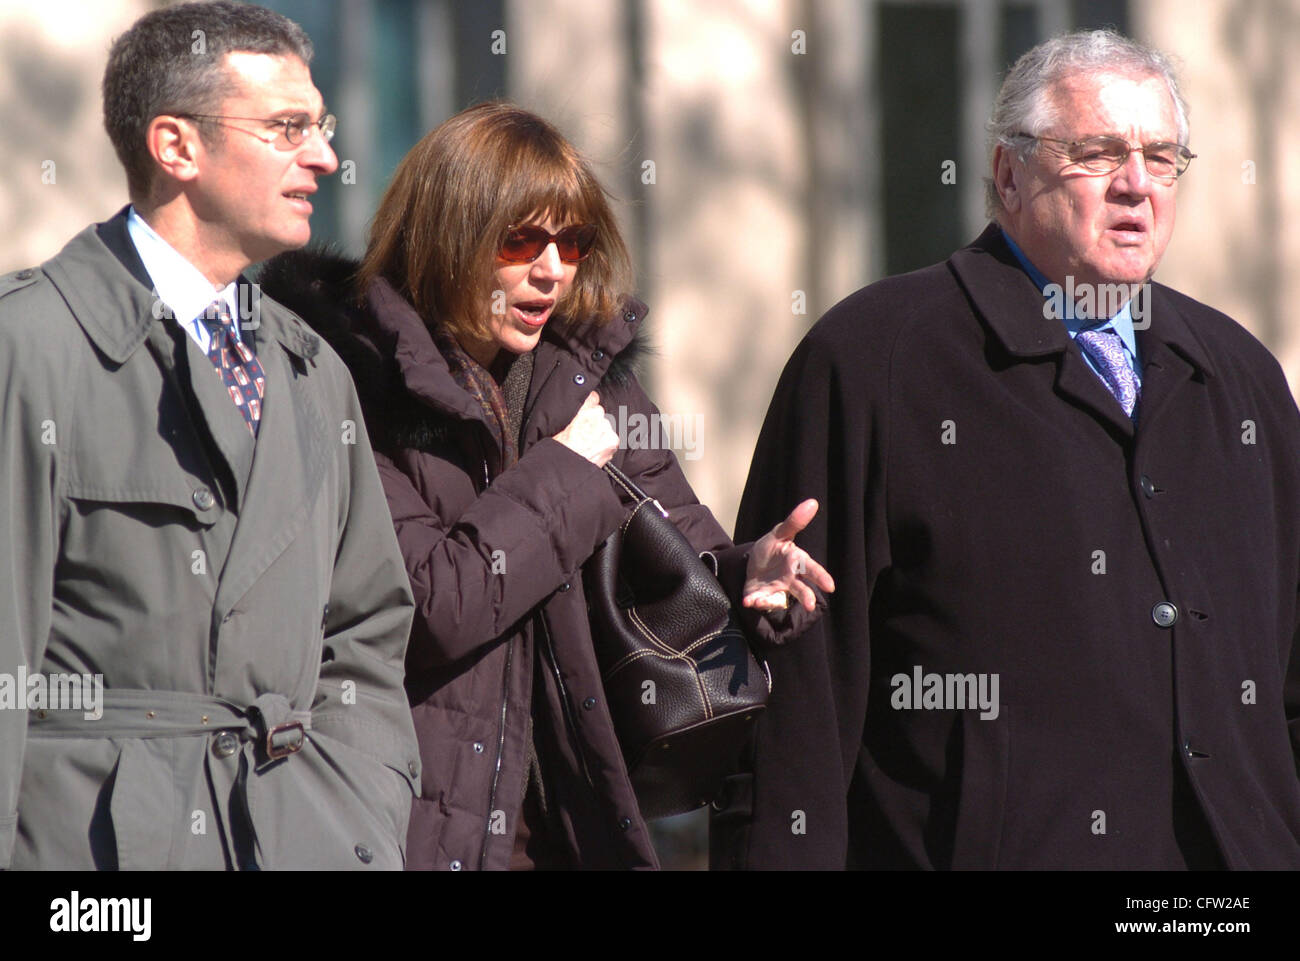 Jan 31, 2007 - Washington, DC, USA - REPORTER JUDITH MILLER, left, and her lawyer, Robert, Bennett, leave the U.S. District Court House in Washington, D.C., Jan. 31, 2007, after Miller finished testifying for the prosecution in the I. Lewis 'Scooter' Libby perjury trial.This is the second week of th Stock Photo